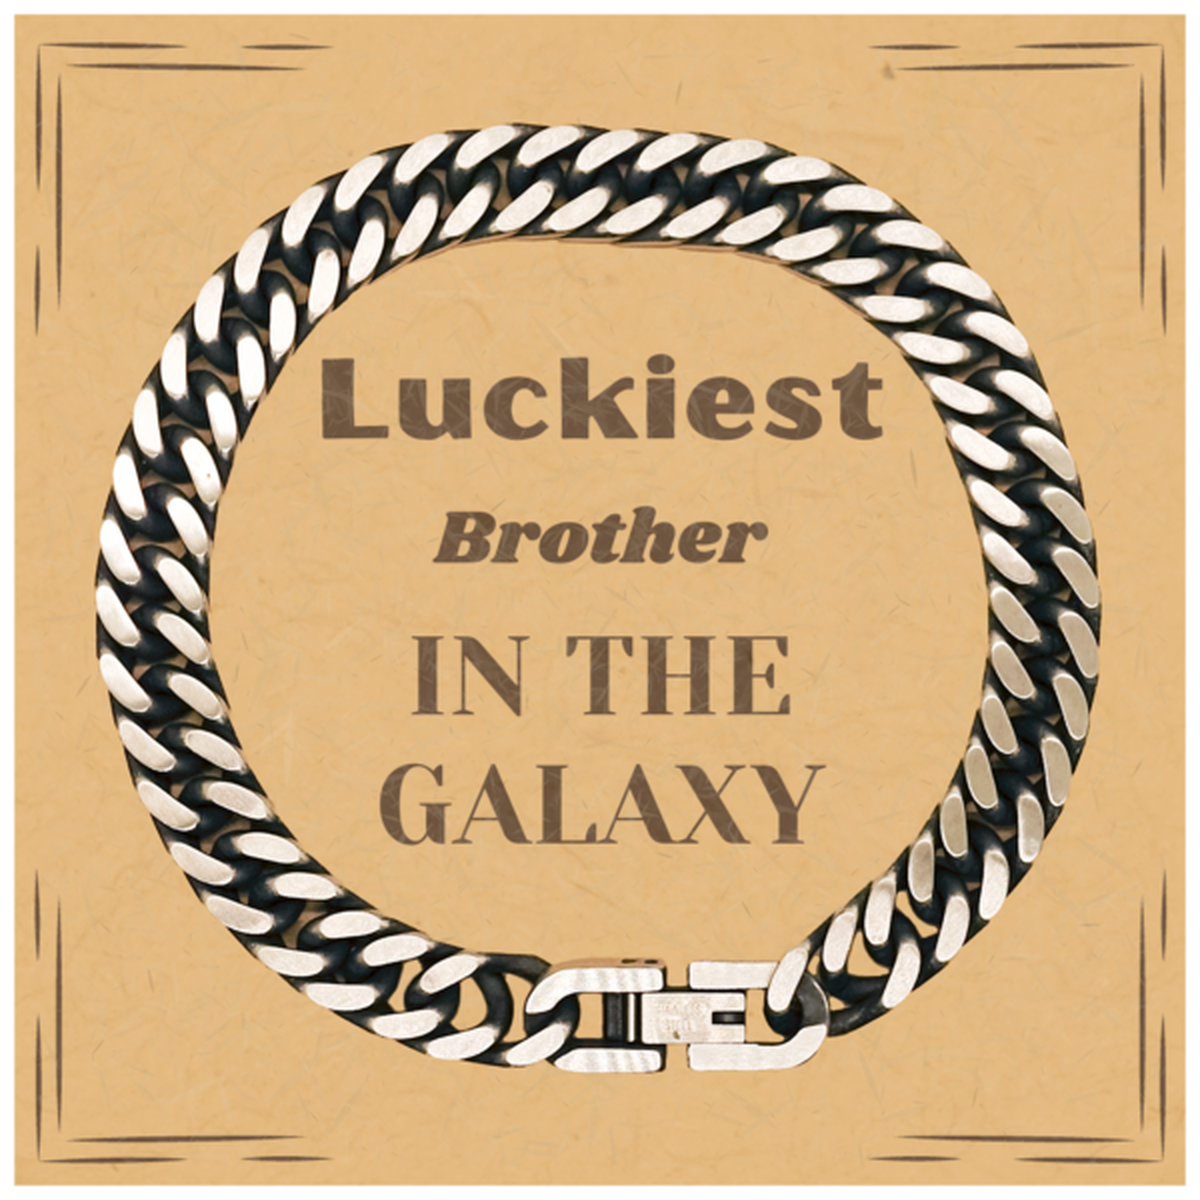 Luckiest Brother in the Galaxy, To My Brother Message Card Gifts, Christmas Brother Cuban Link Chain Bracelet Gifts, X-mas Birthday Unique Gifts For Brother Men Women